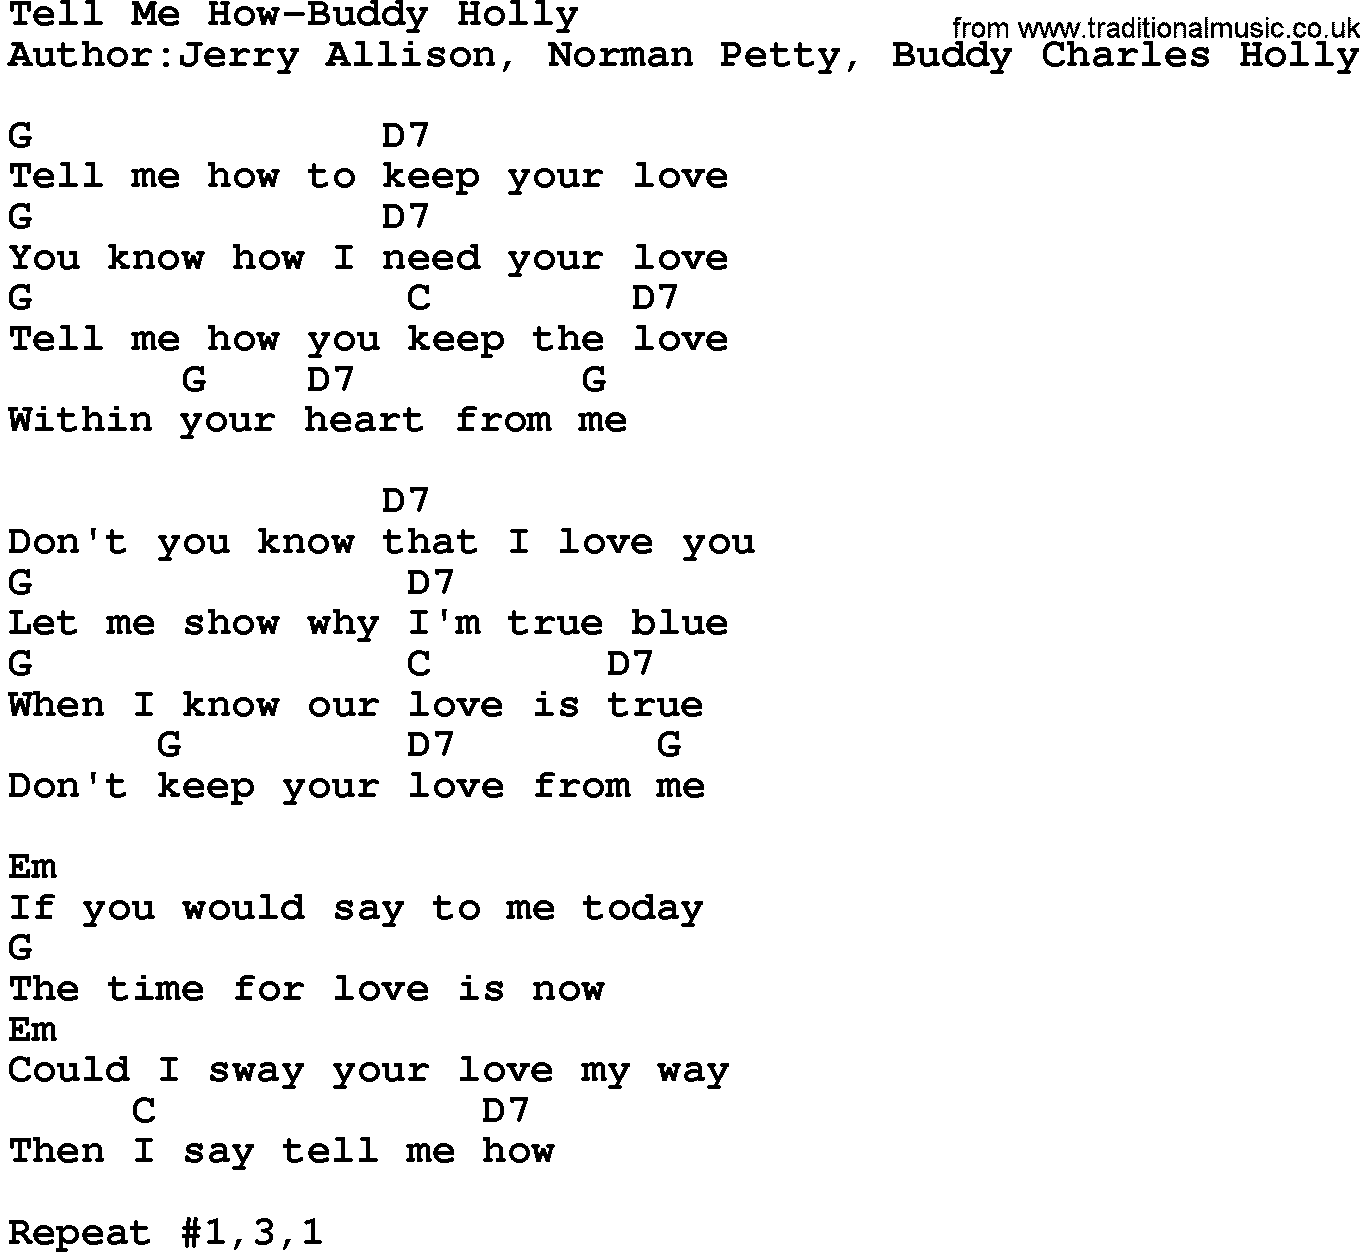 Country music song: Tell Me How-Buddy Holly lyrics and chords